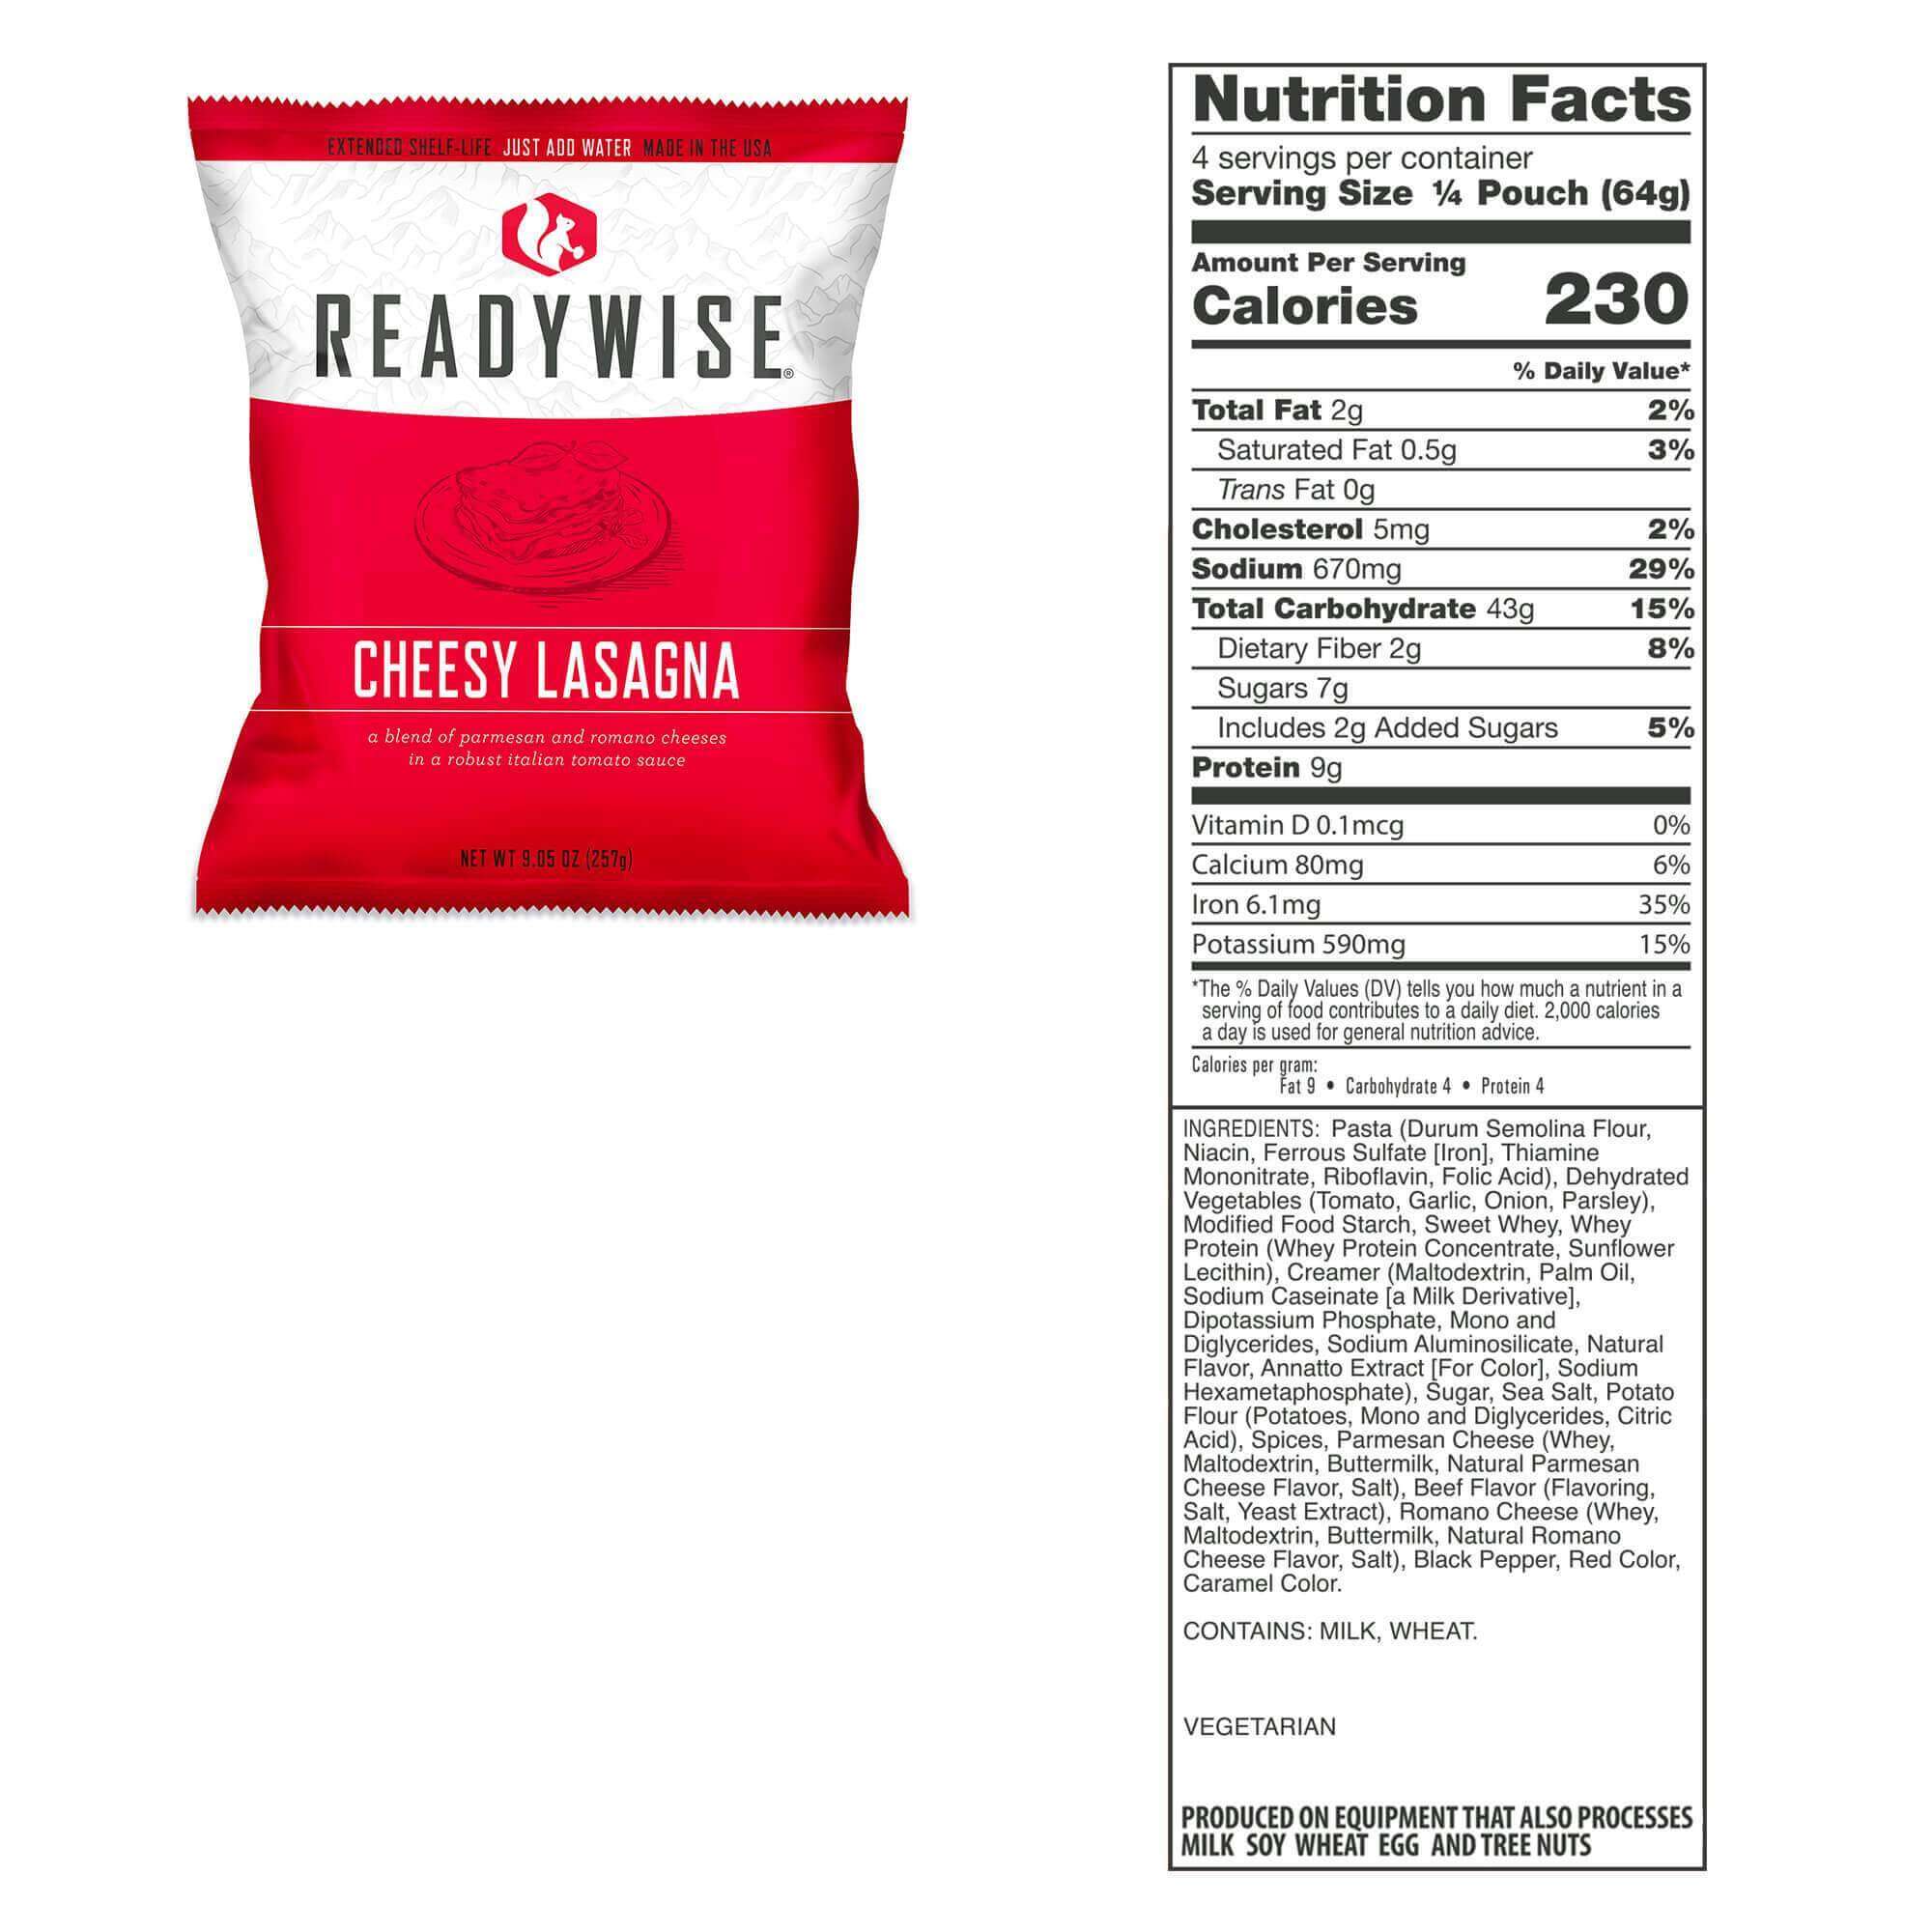 ReadyWise (formerly Wise Food Storage) 1 Year Kit for 1 Person - 1080 Serving Package - 186 lbs - Includes 6 - 120 Serving Entree Buckets and 3 - 120 Serving Breakfast Buckets (SHIPS IN 1-2 WEEKS) cheesy lama chips.